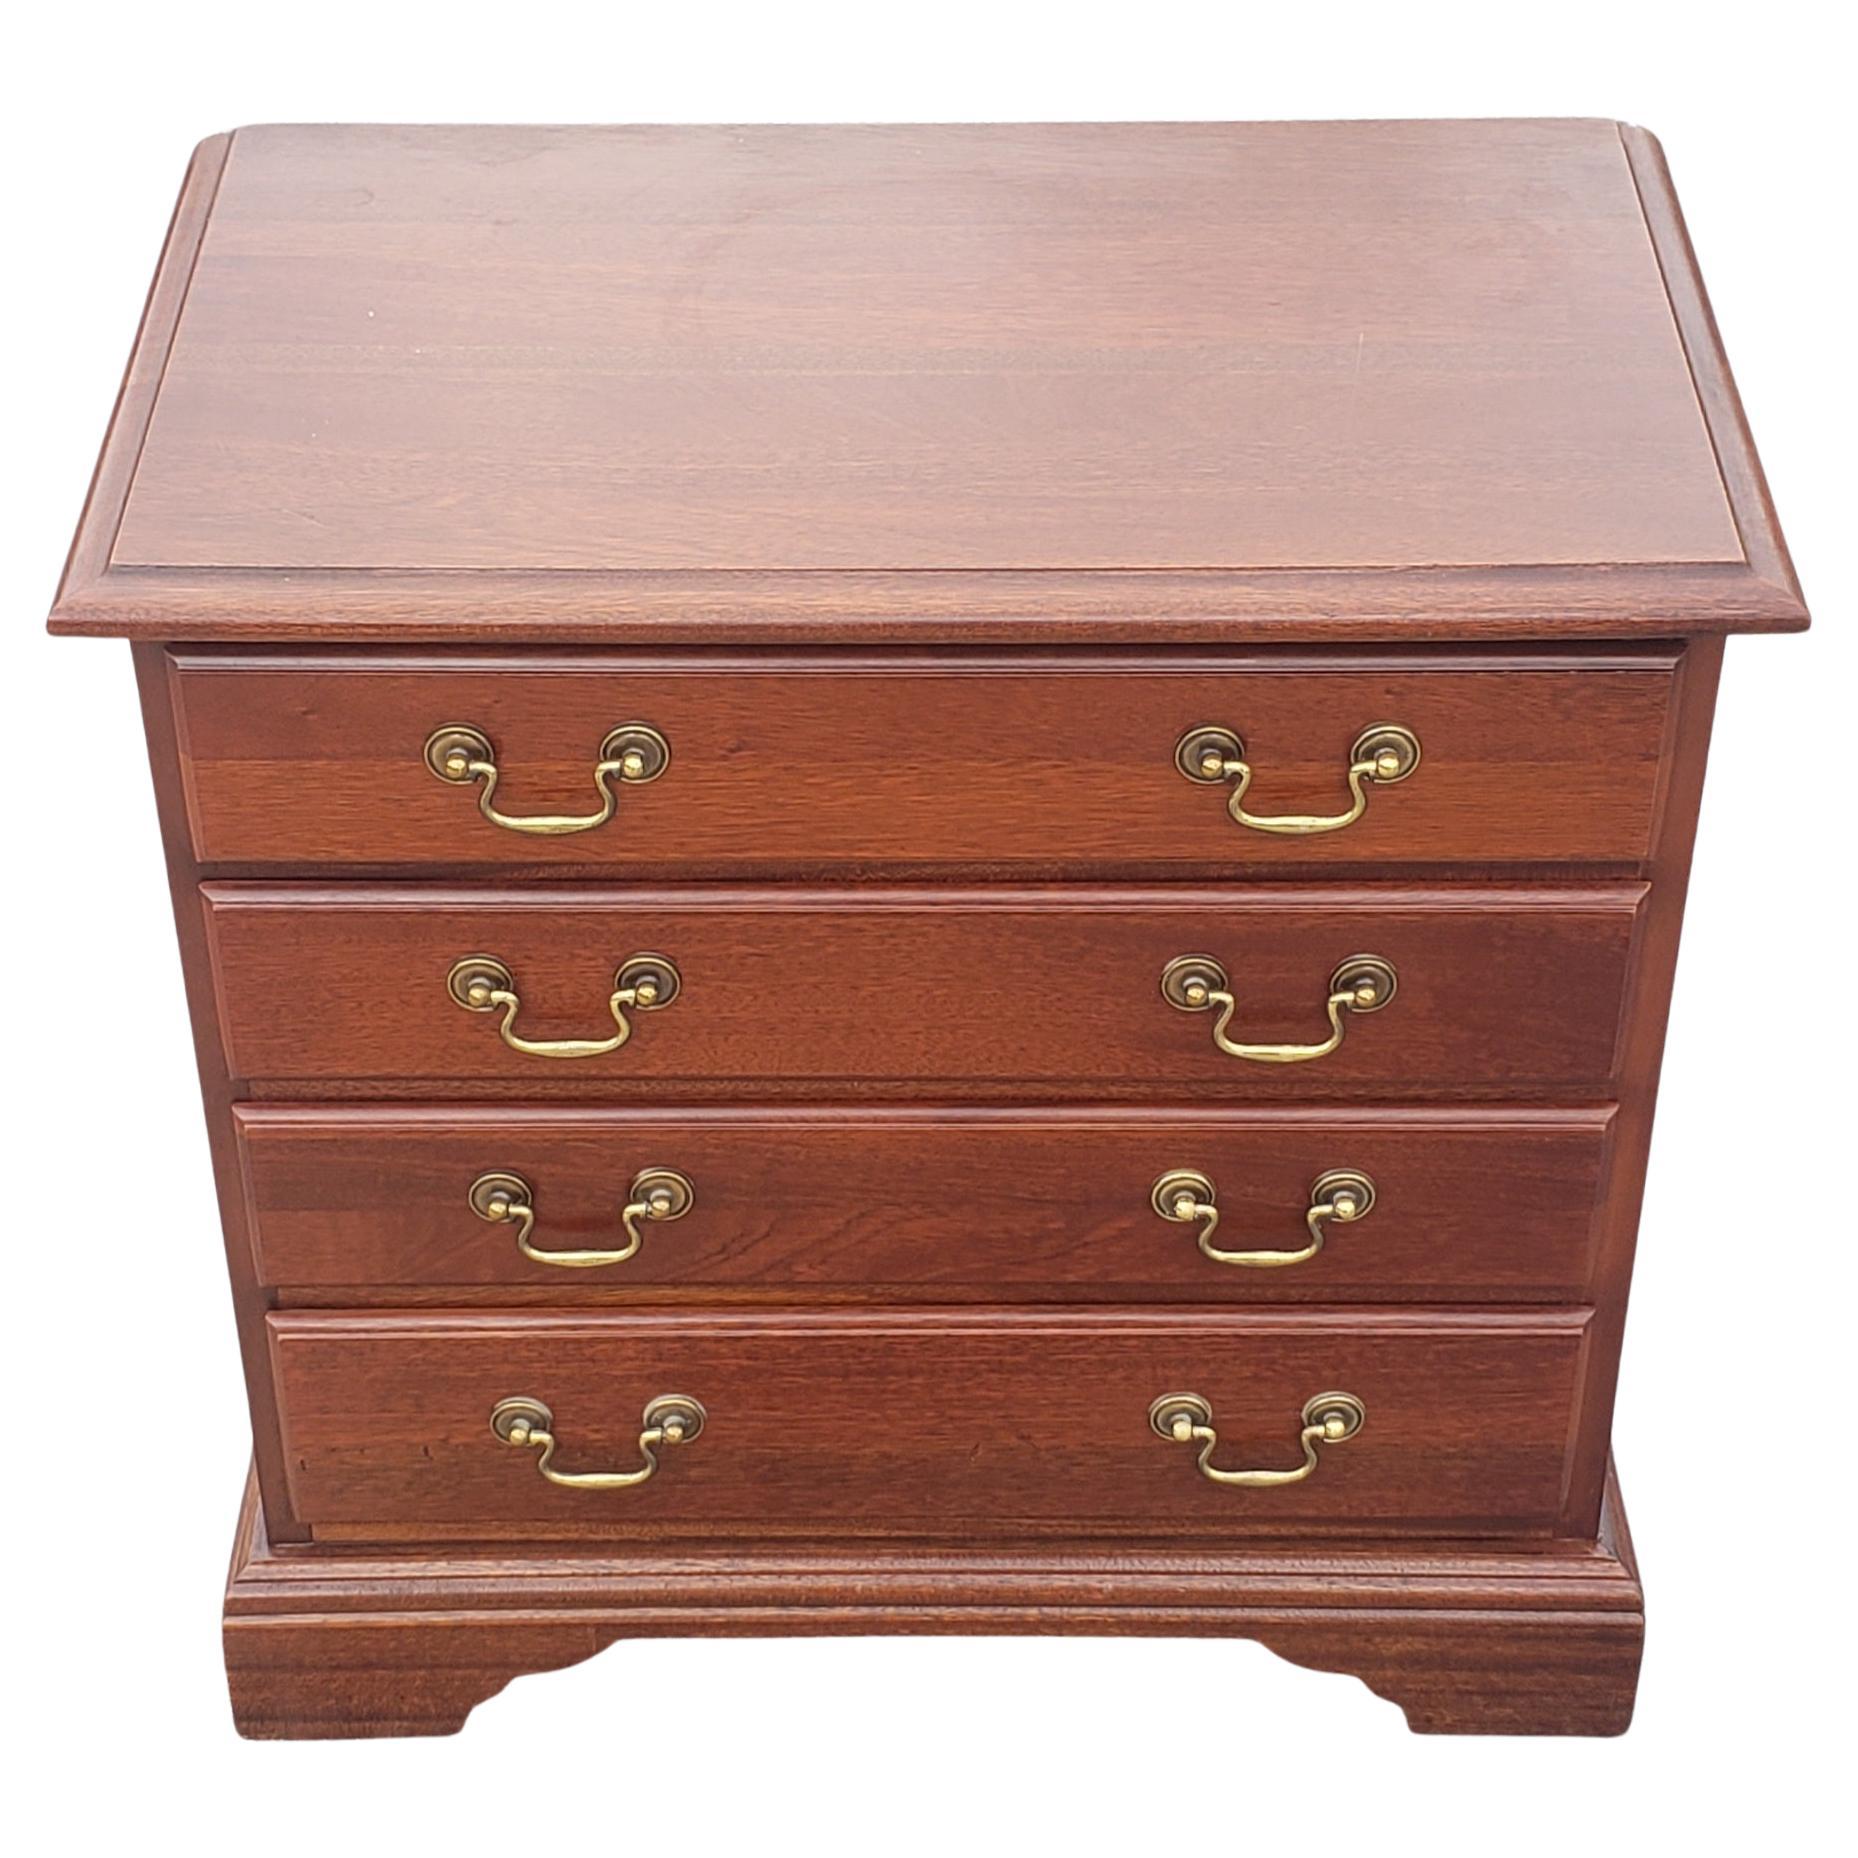 A beautiful Chippendale 4-drawer mahogany bedside commode chest of drawers in great condition. Flawless drawers with dovetail construction
Measures 24